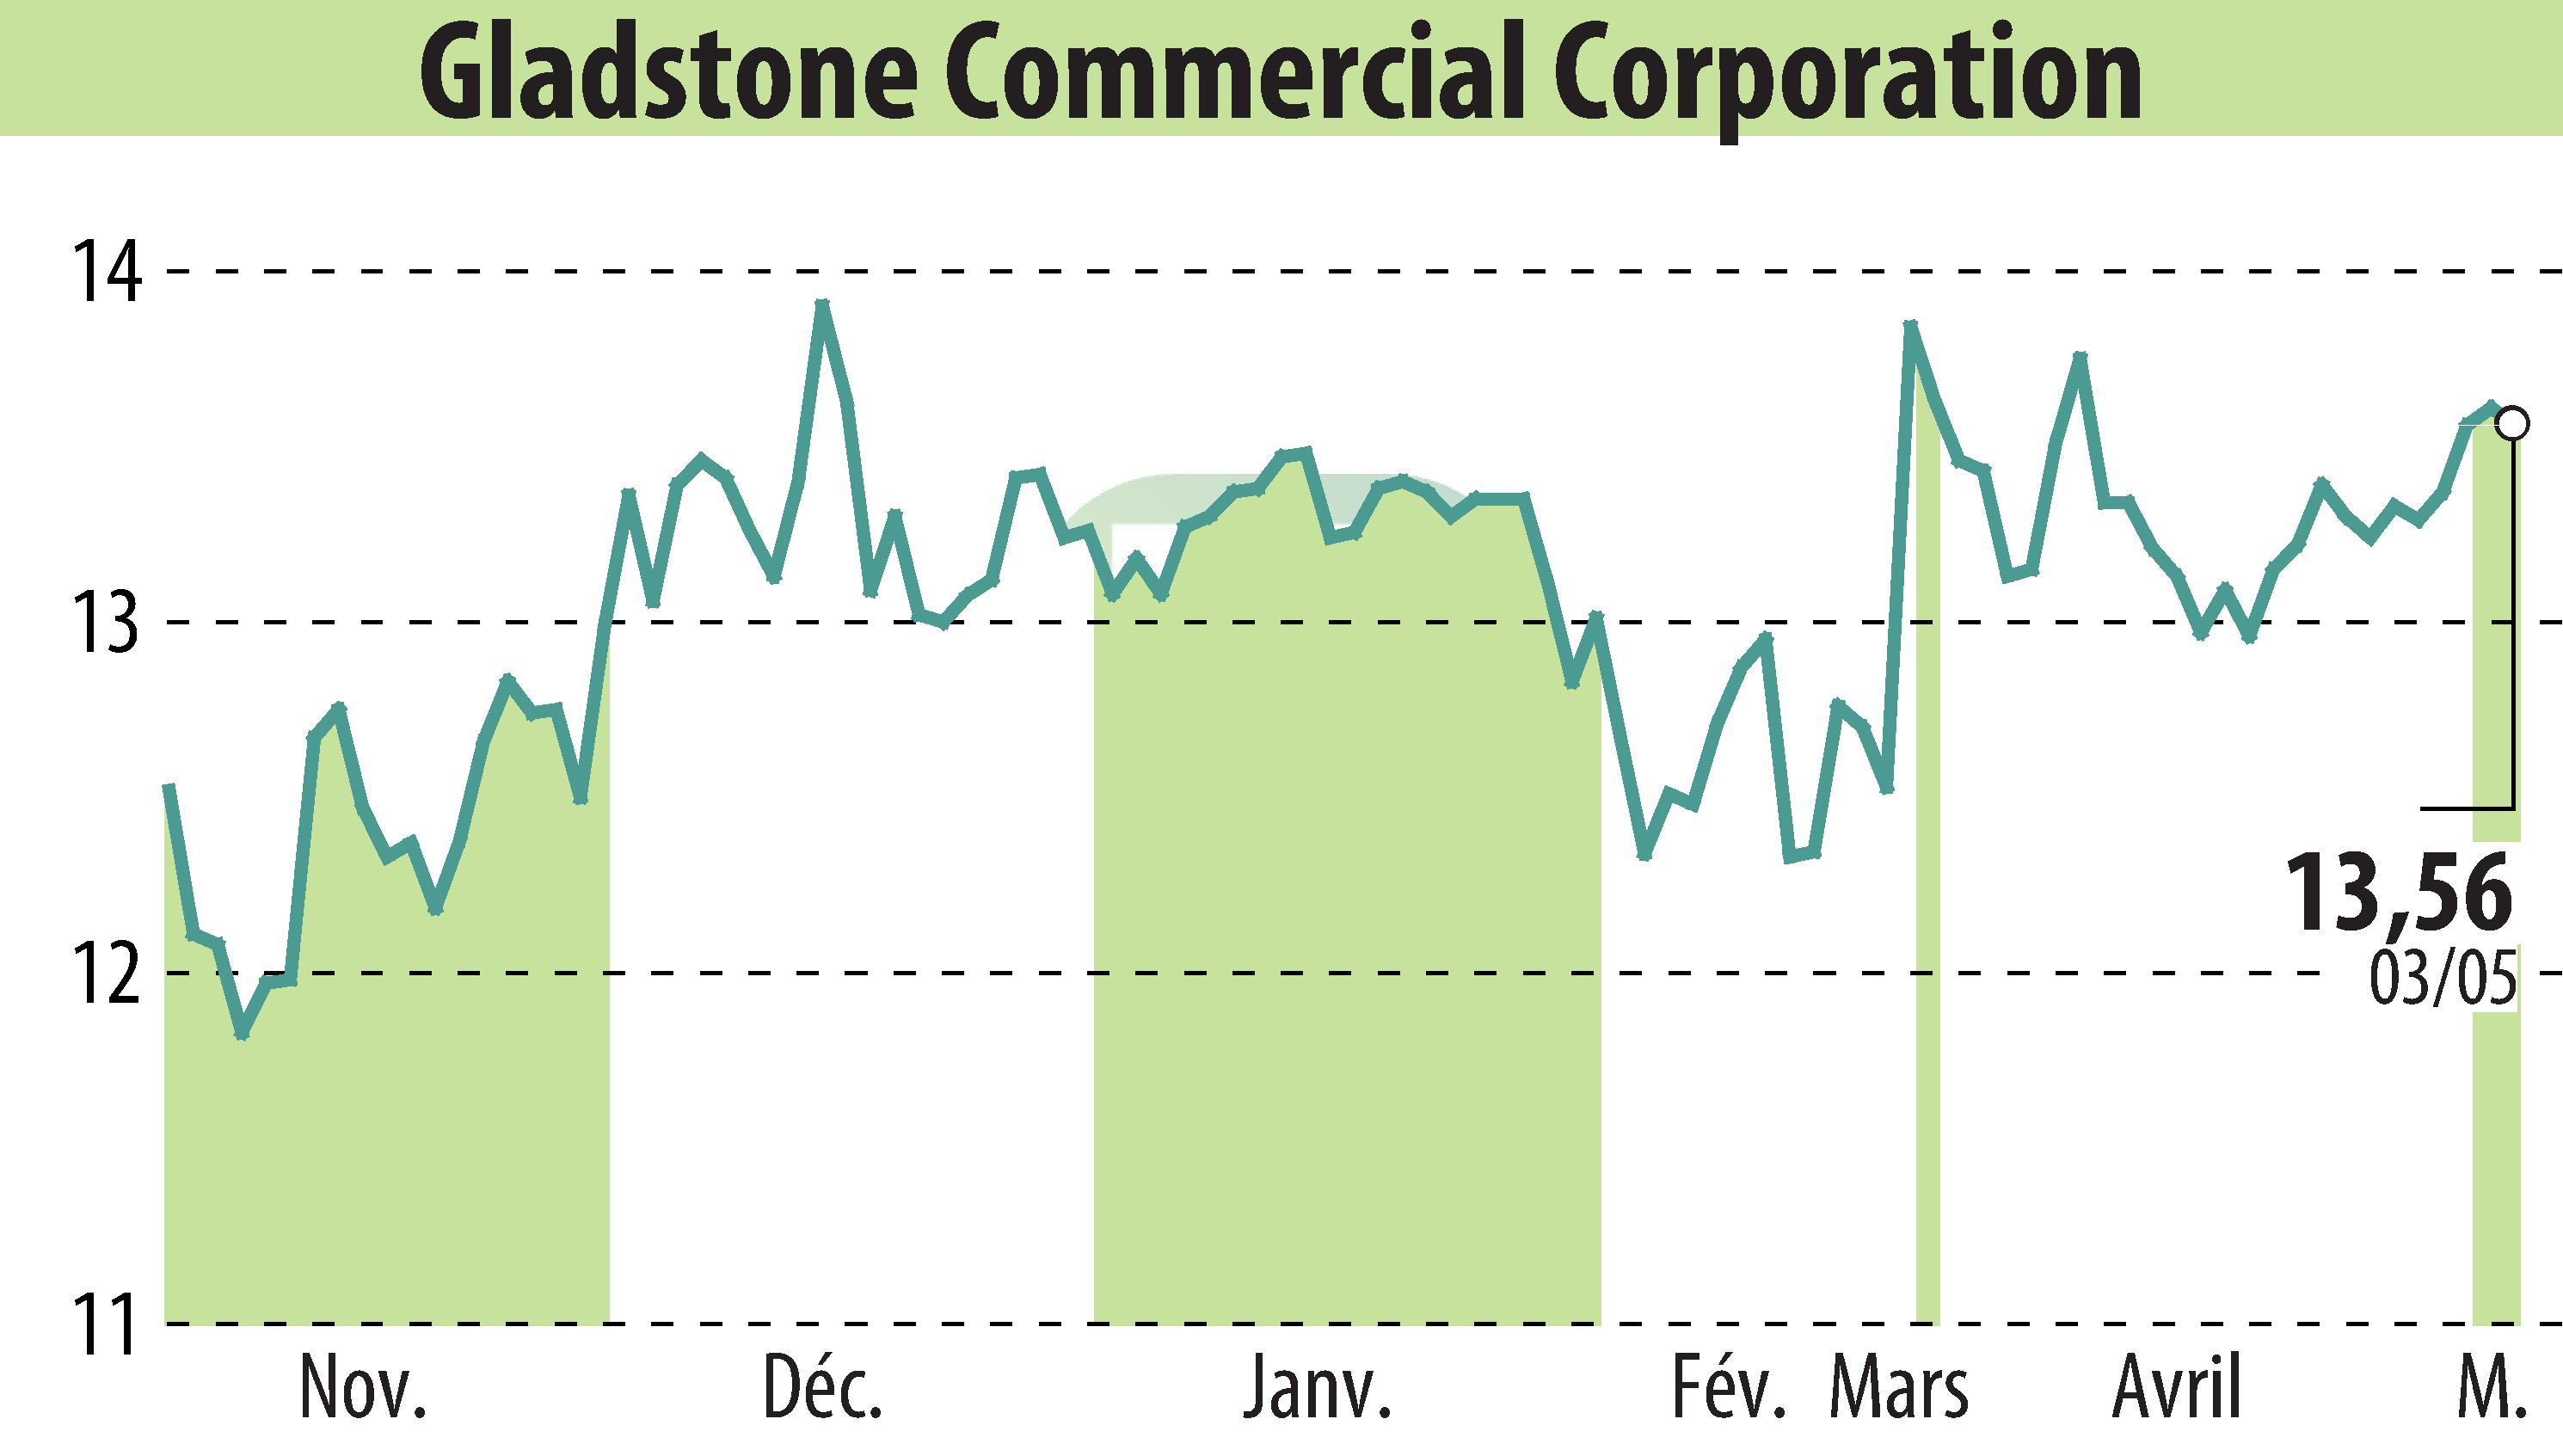 Stock price chart of Gladstone Commercial Corporation (EBR:GOOD) showing fluctuations.